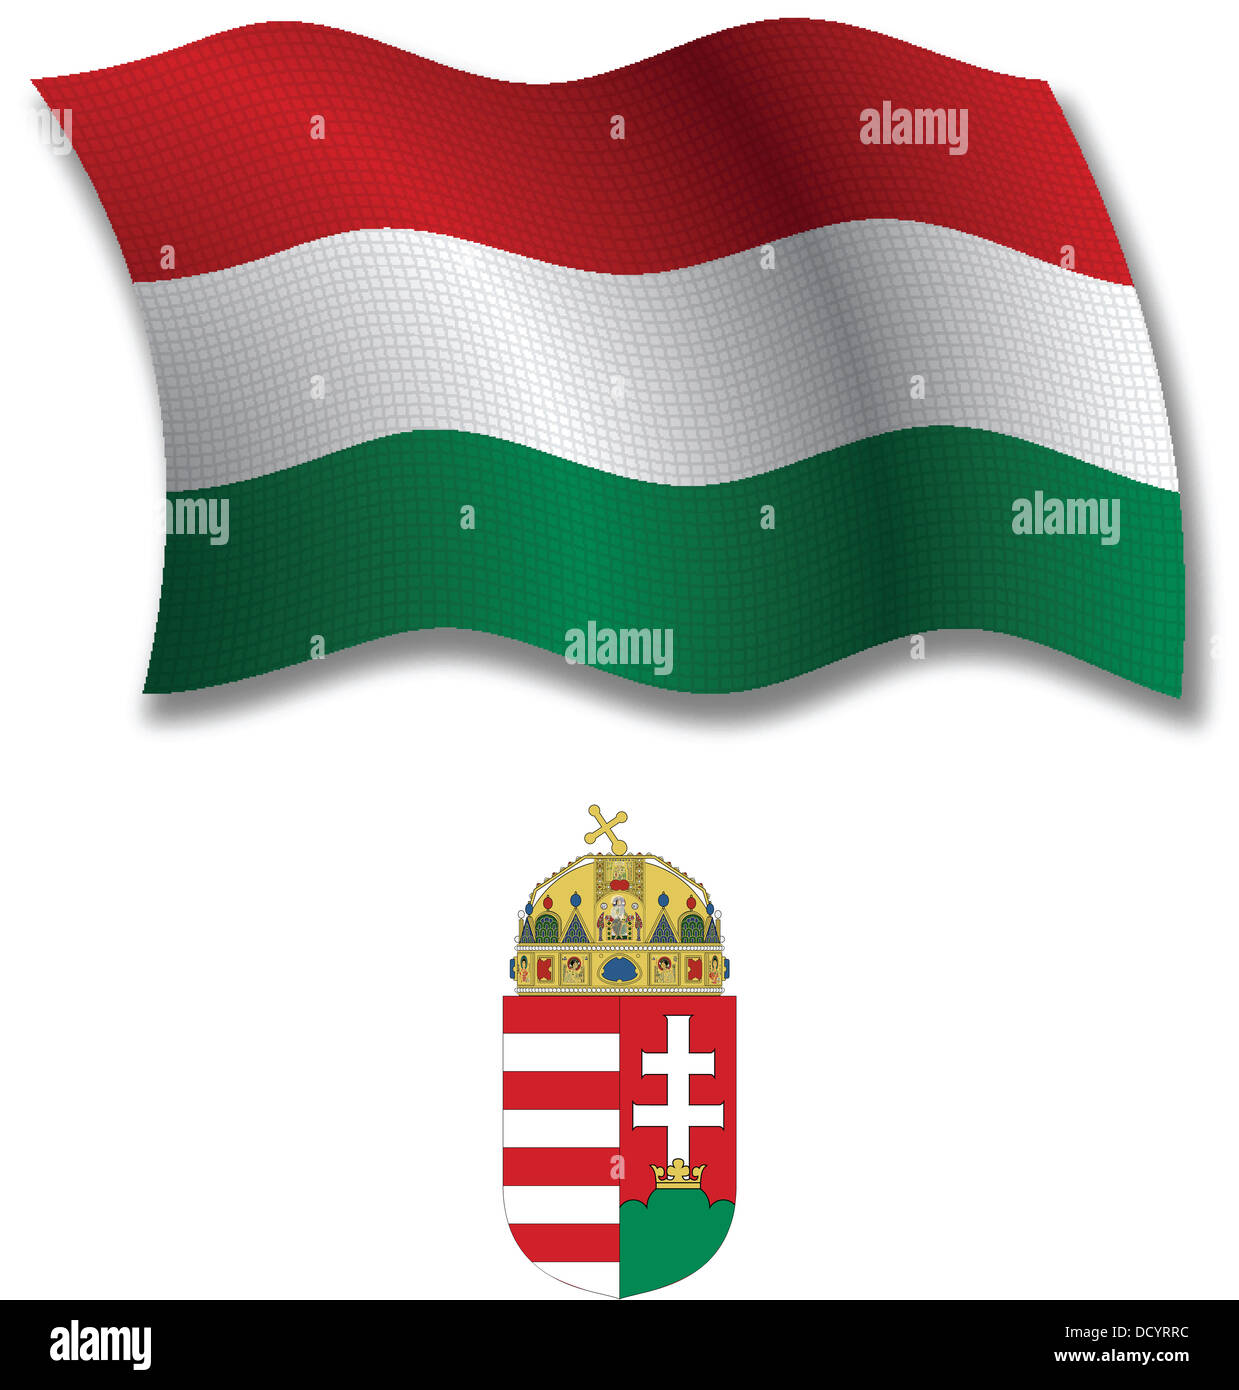 hungary shadowed textured wavy flag and coat of arms against white background, vector art illustration Stock Photo